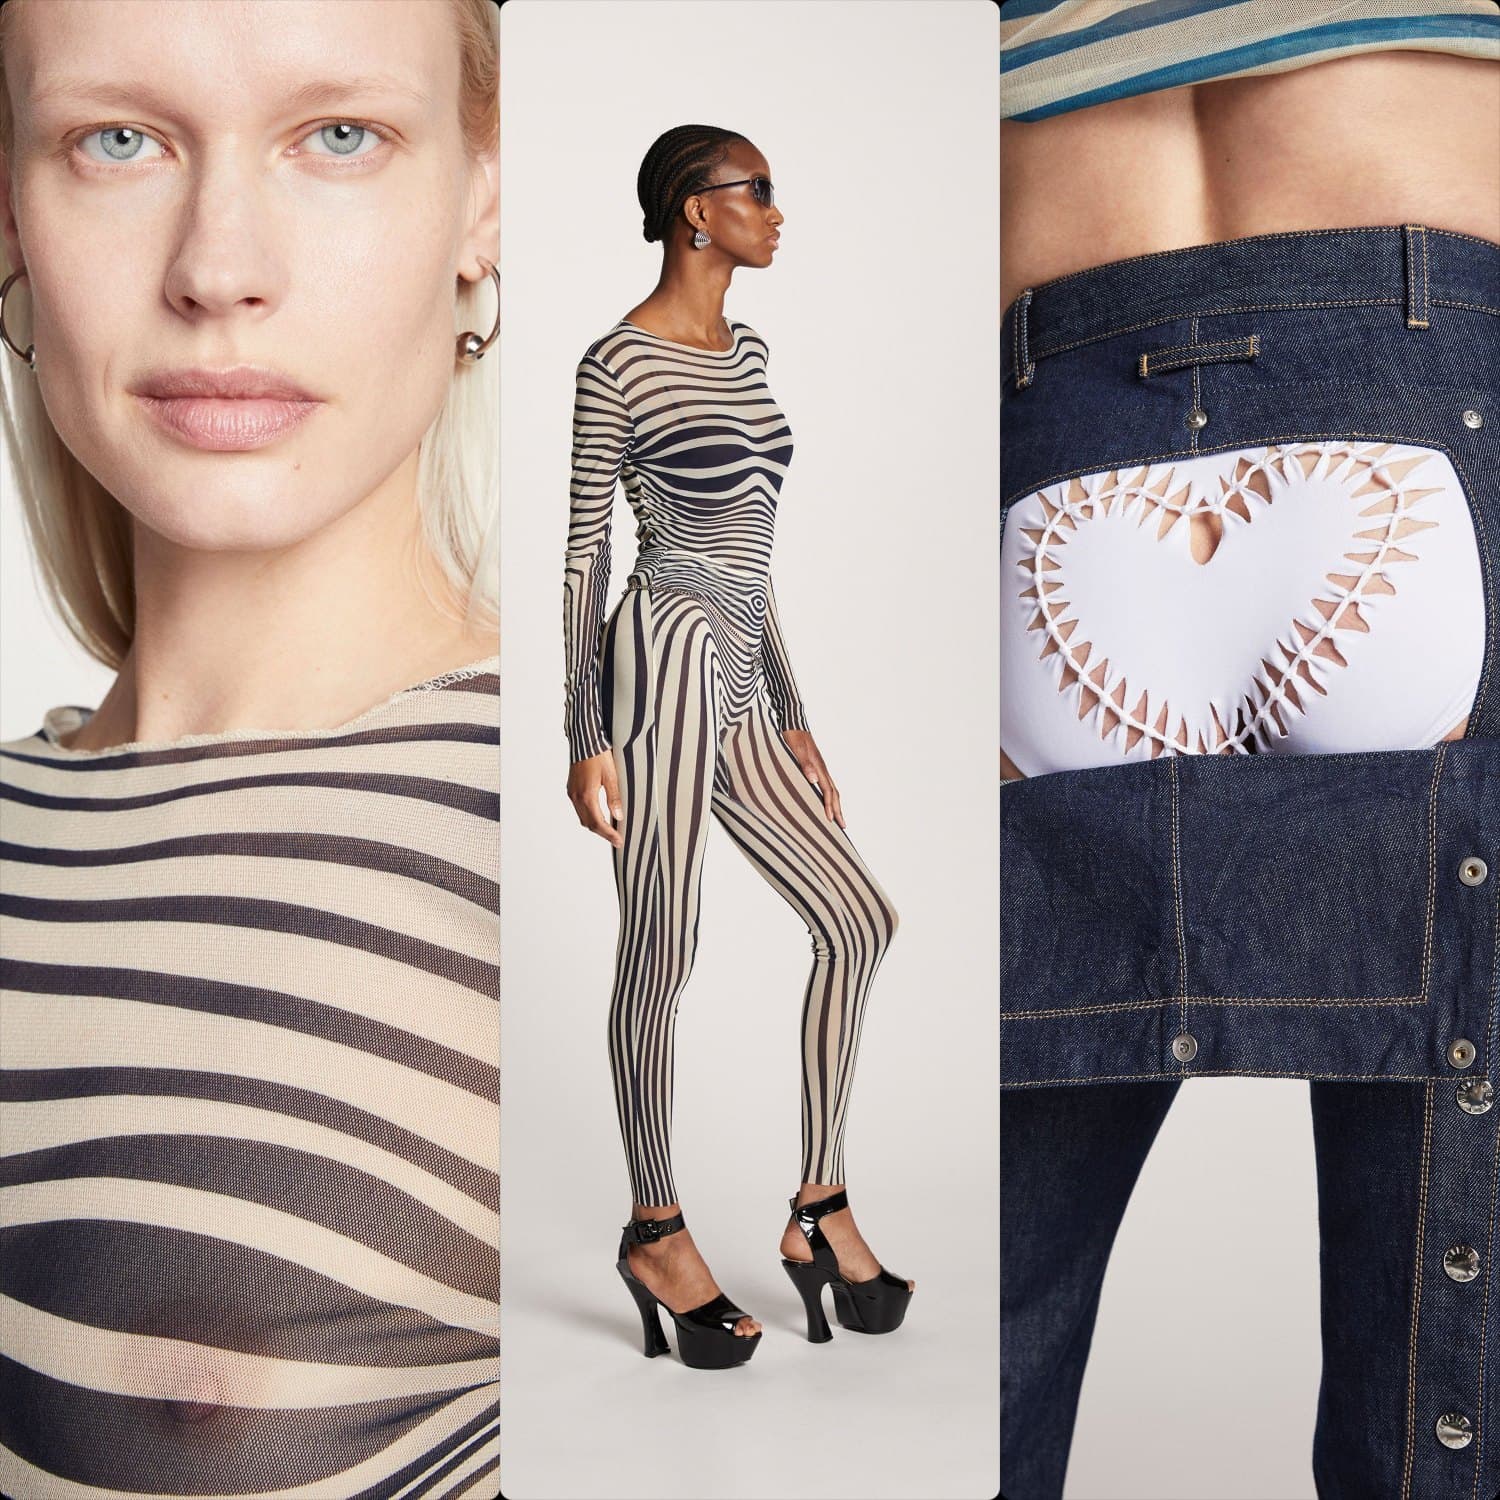 Jean Paul Gaultier Ready-to-Wear 2021 - The Sailors Capsule Collection. RUNWAY MAGAZINE ® Collections. RUNWAY NOW / RUNWAY NEW